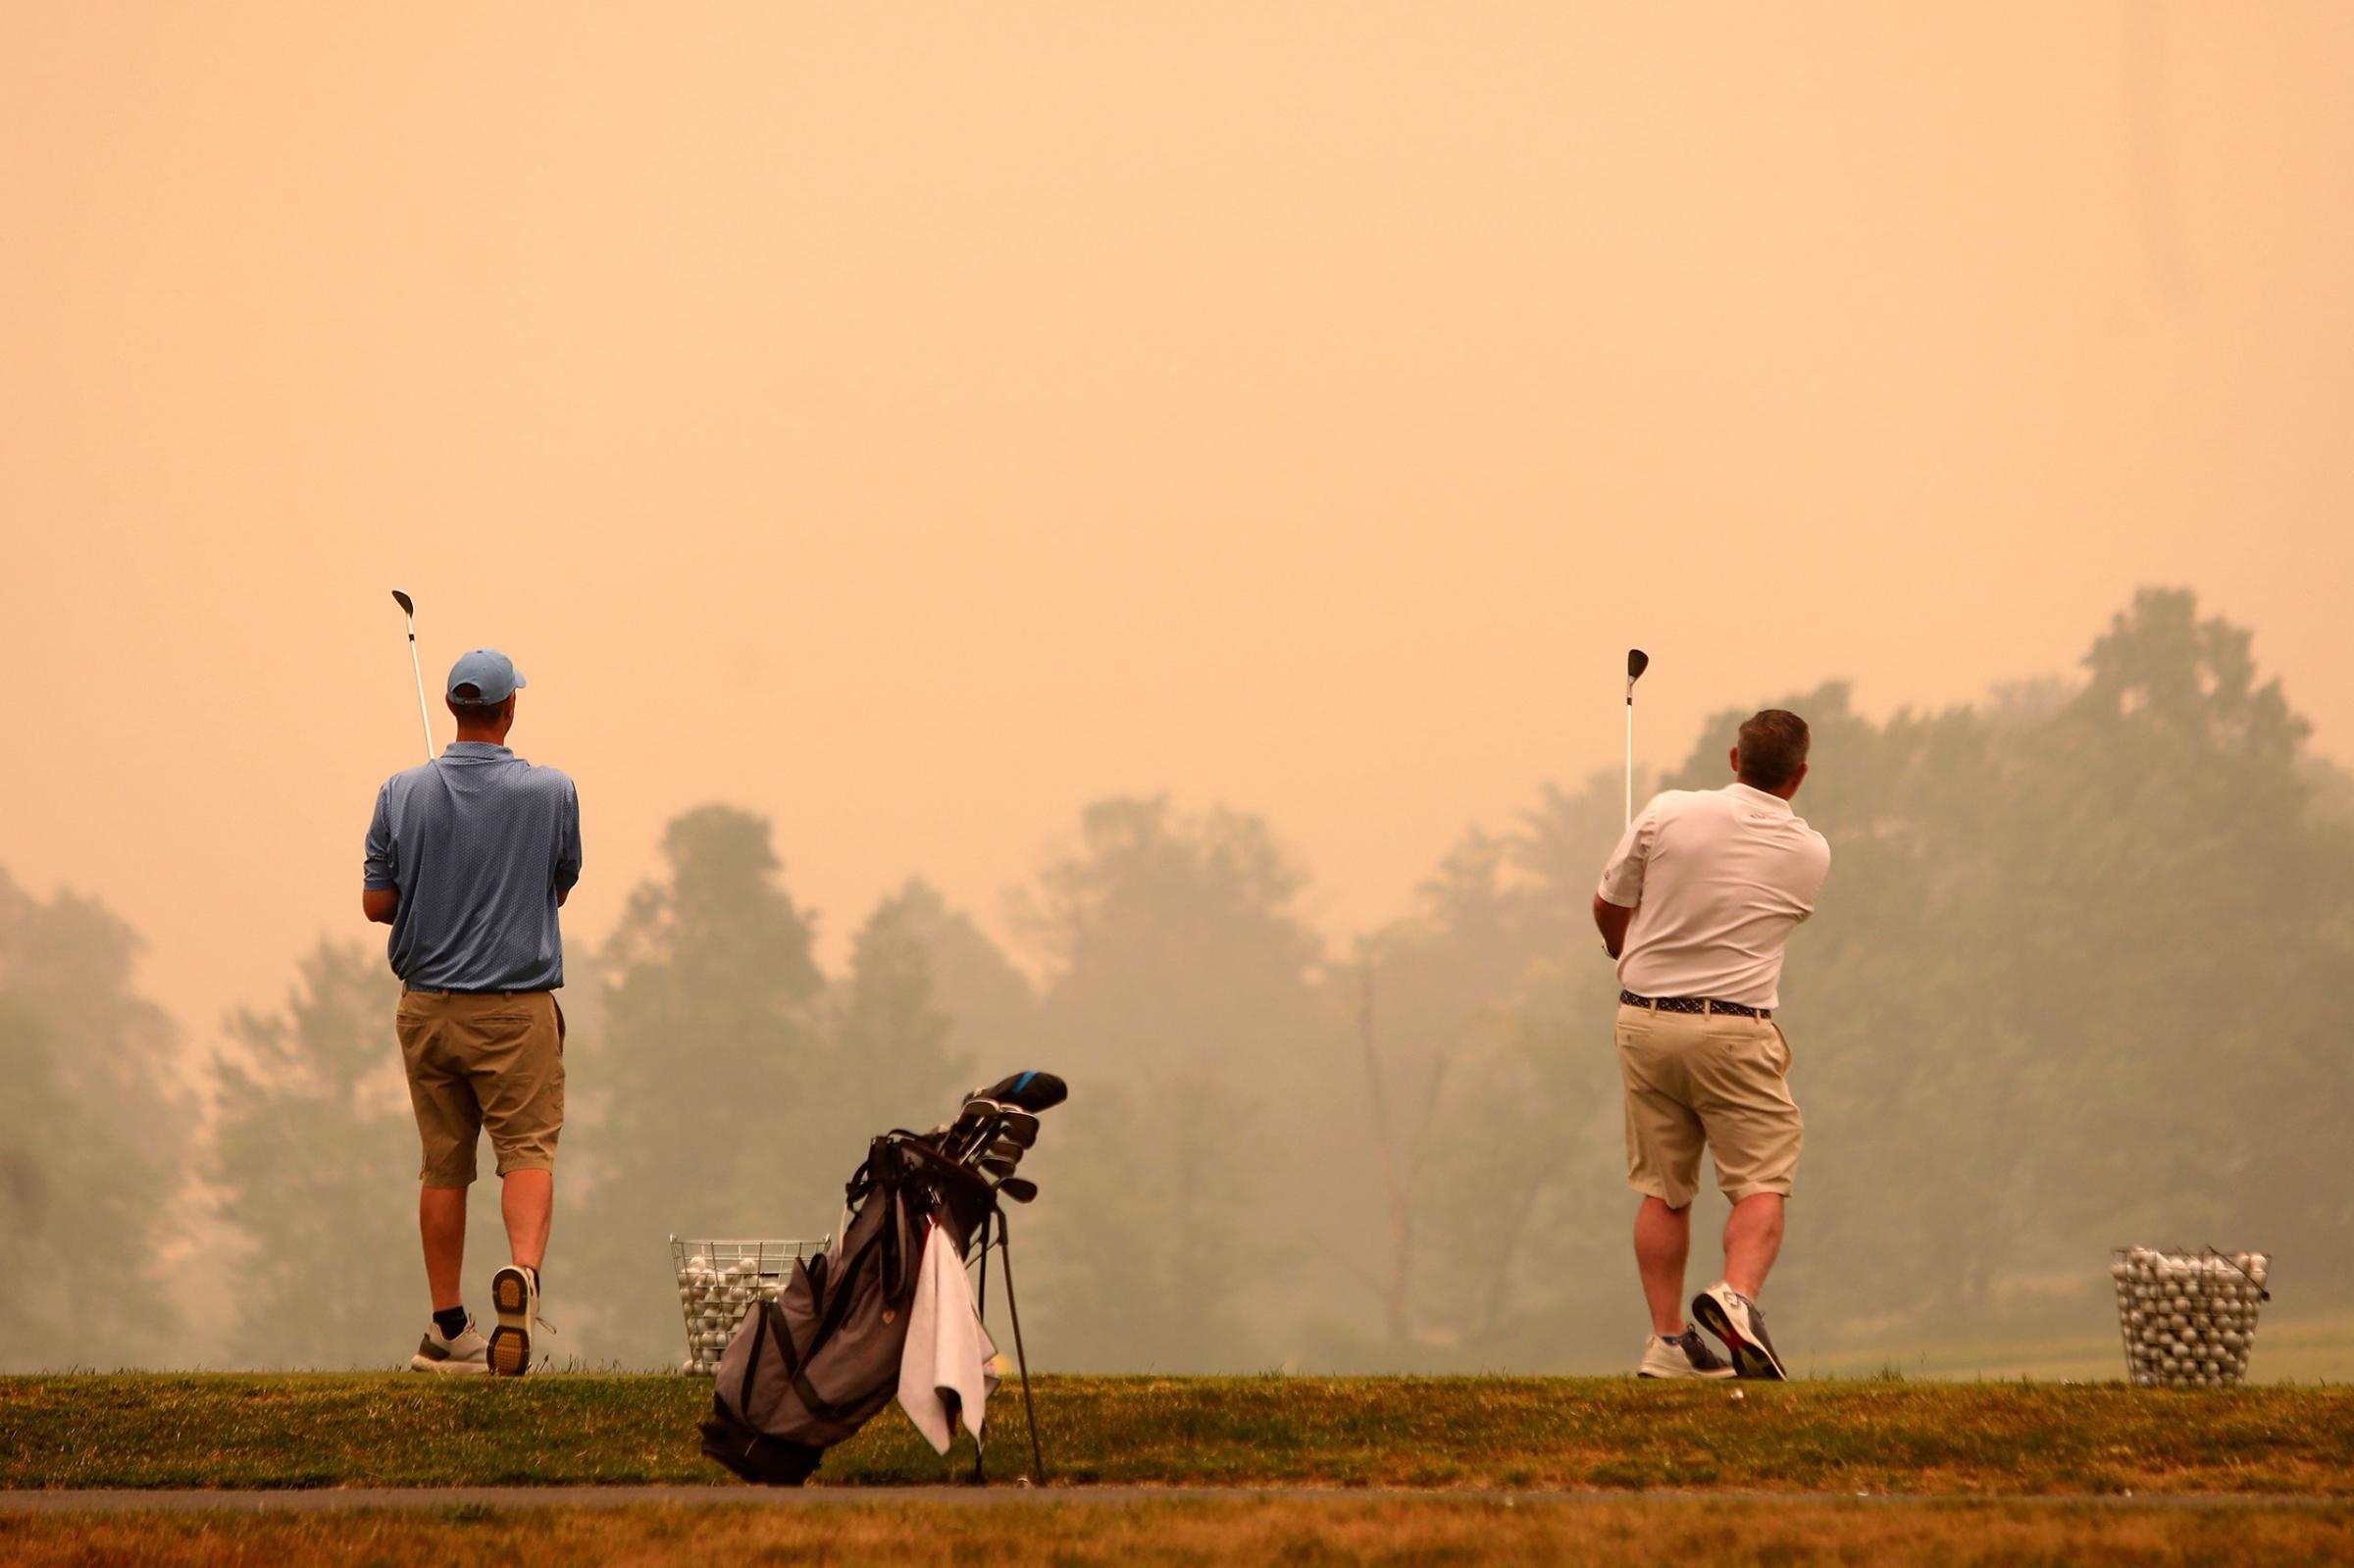 Golfers watch their shots at the driving range at Valley Country Club in Sugarloaf, Pa., as smoke from wildfires in Canada fill the air